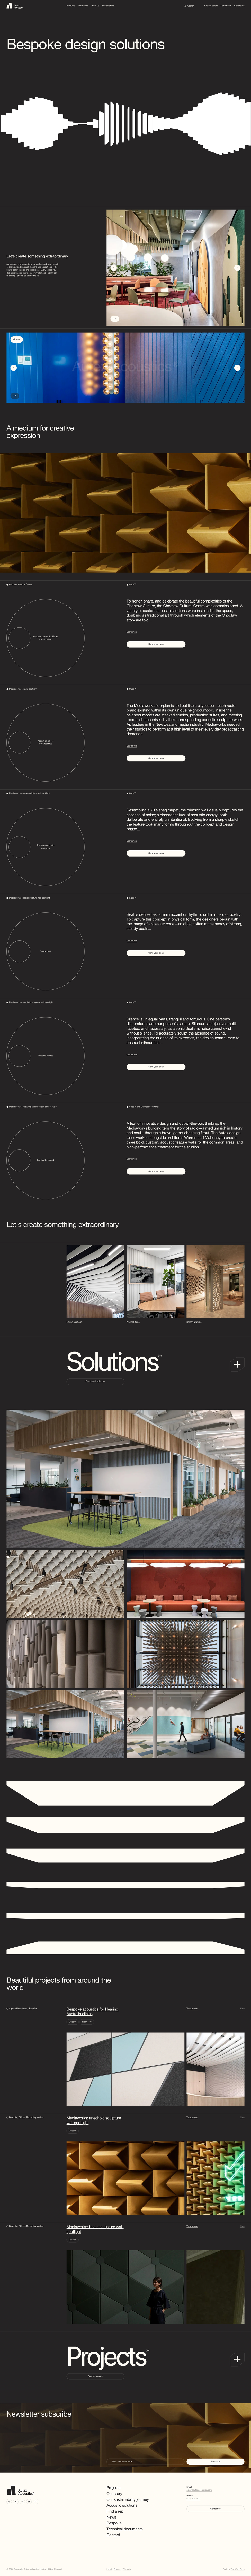 Autex Acoustics Landing Page Example: Autex Acoustics is a leading designer and supplier of innovative acoustic panels and insulation products in USA. Create beautiful yet functional spaces with our solutions.